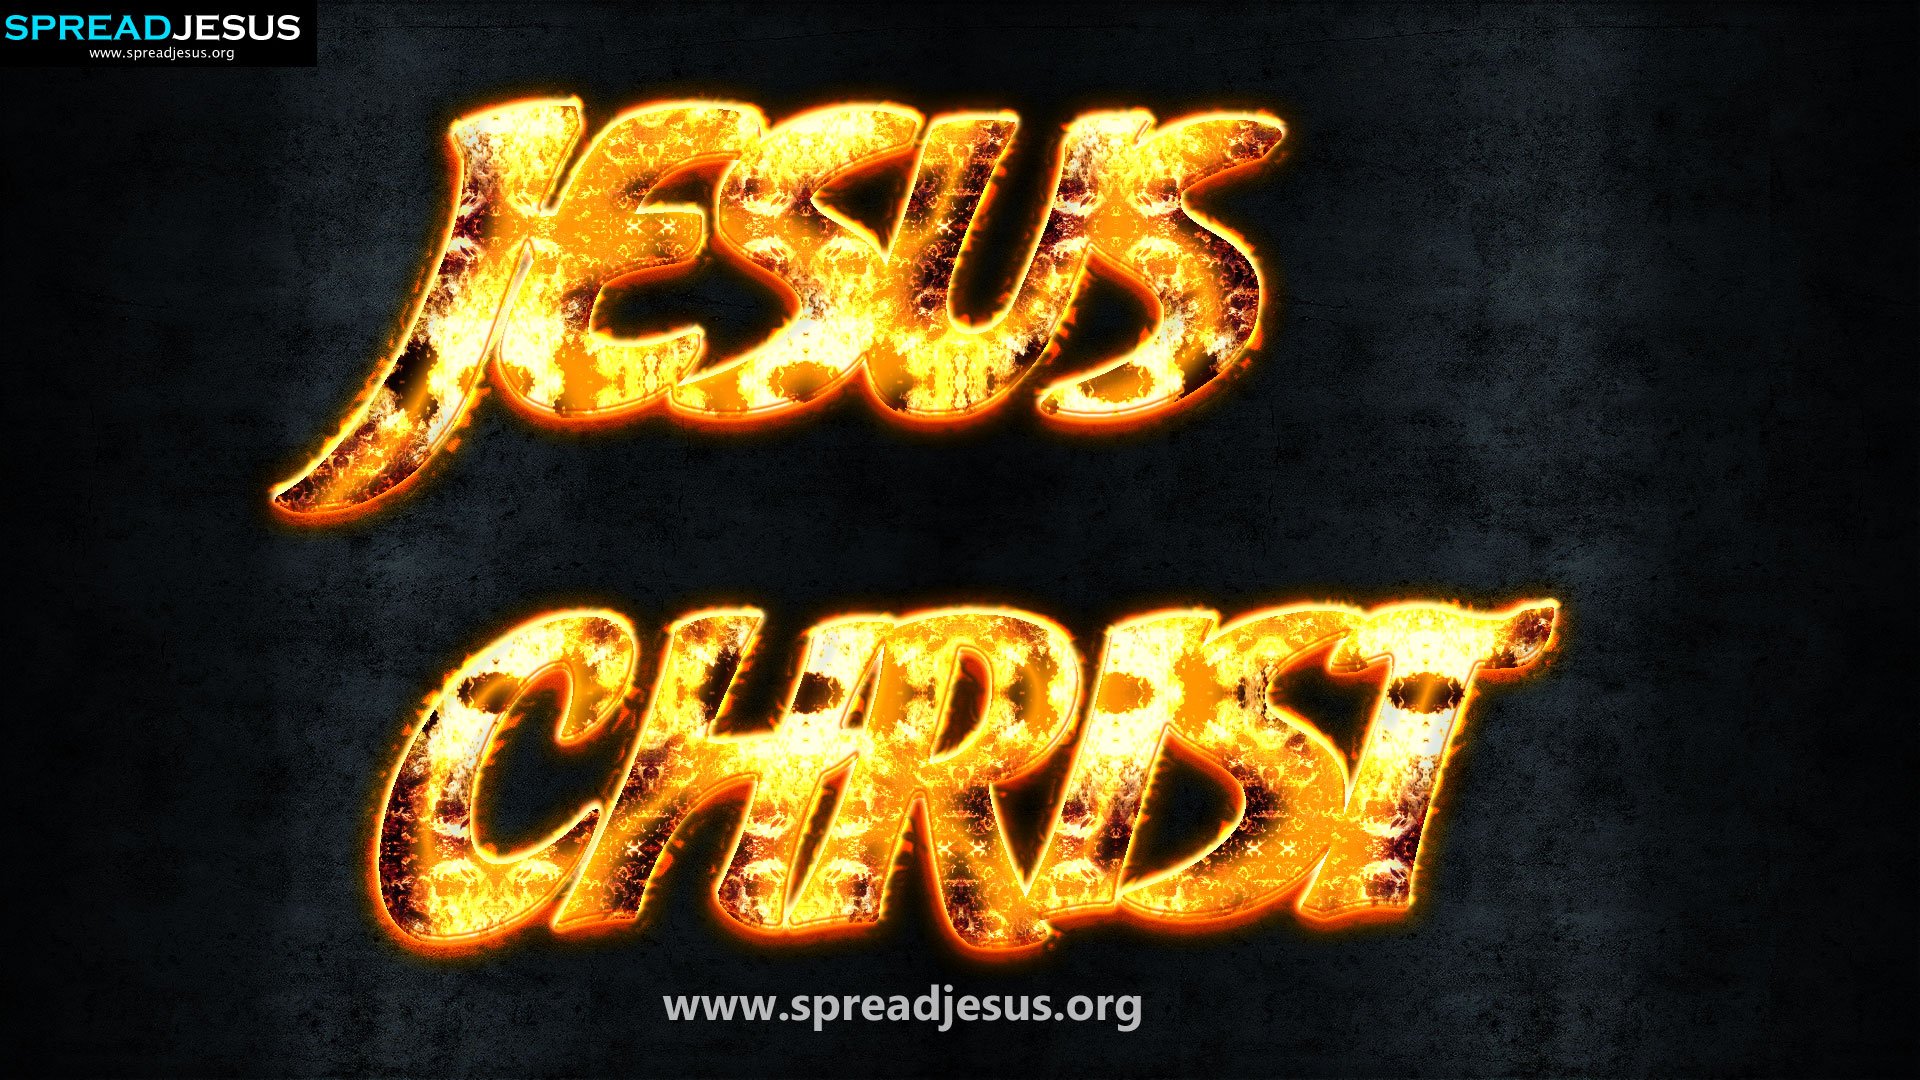  wallpapers Download JESUS CHRIST HD wallpapers Worship the Lord with